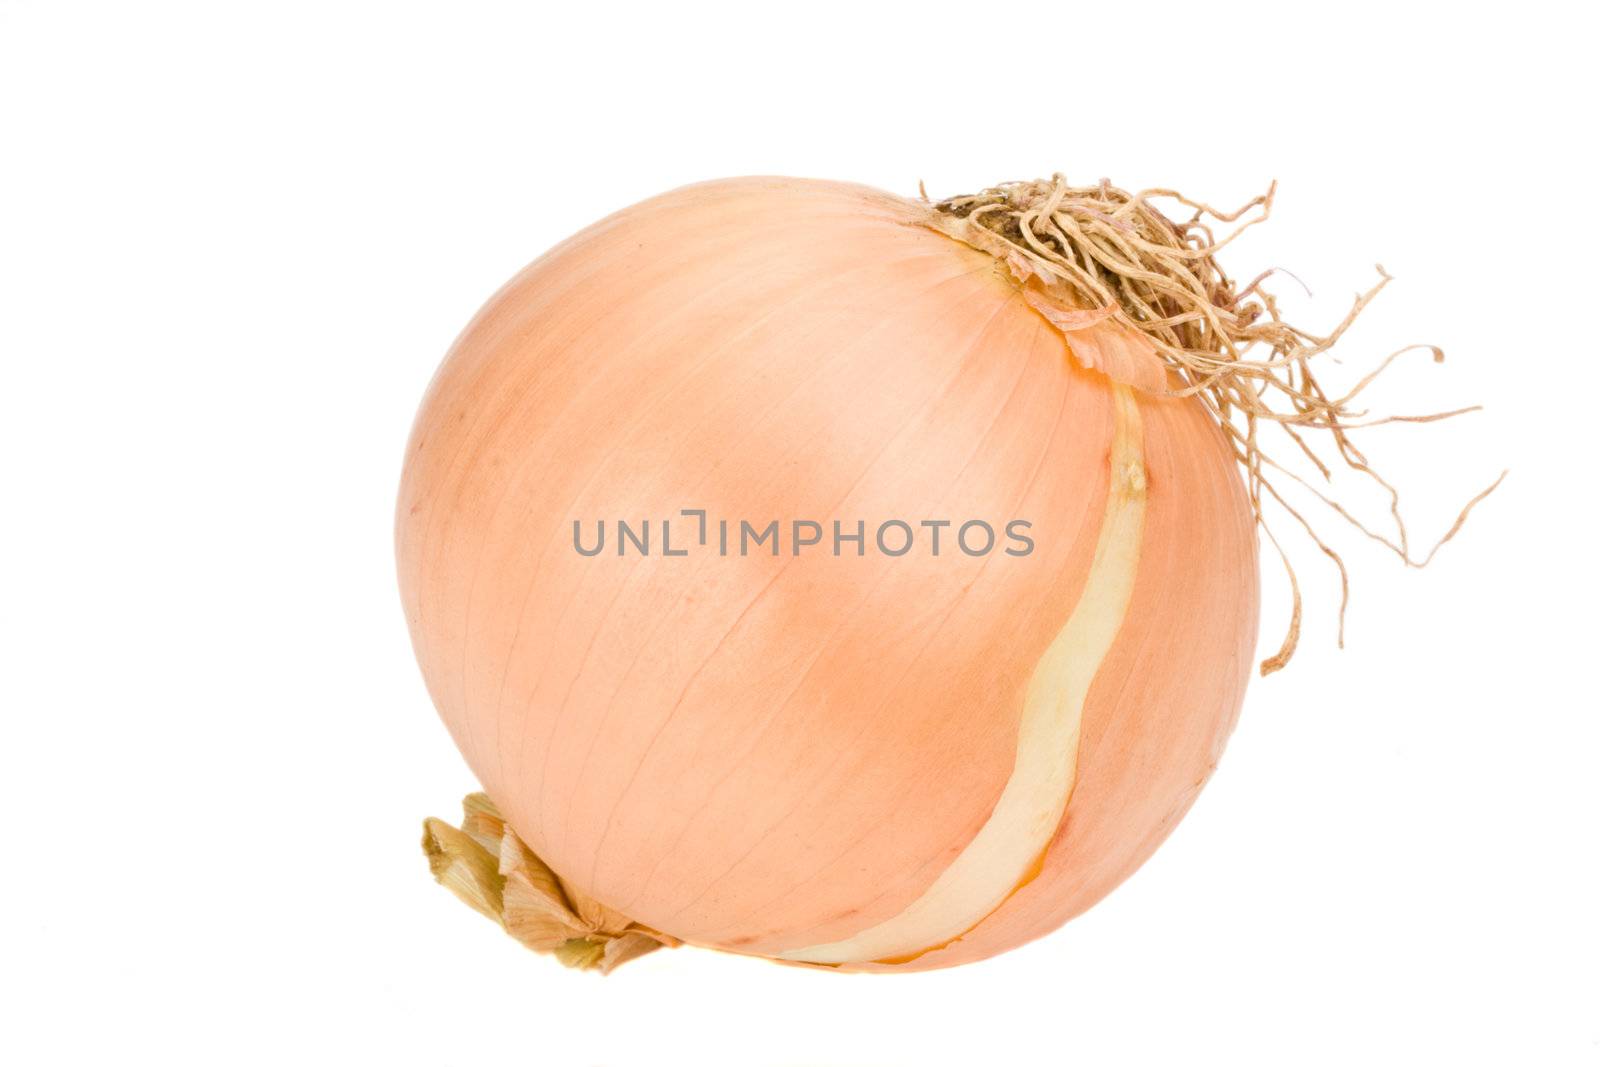 single onion over white background by bernjuer